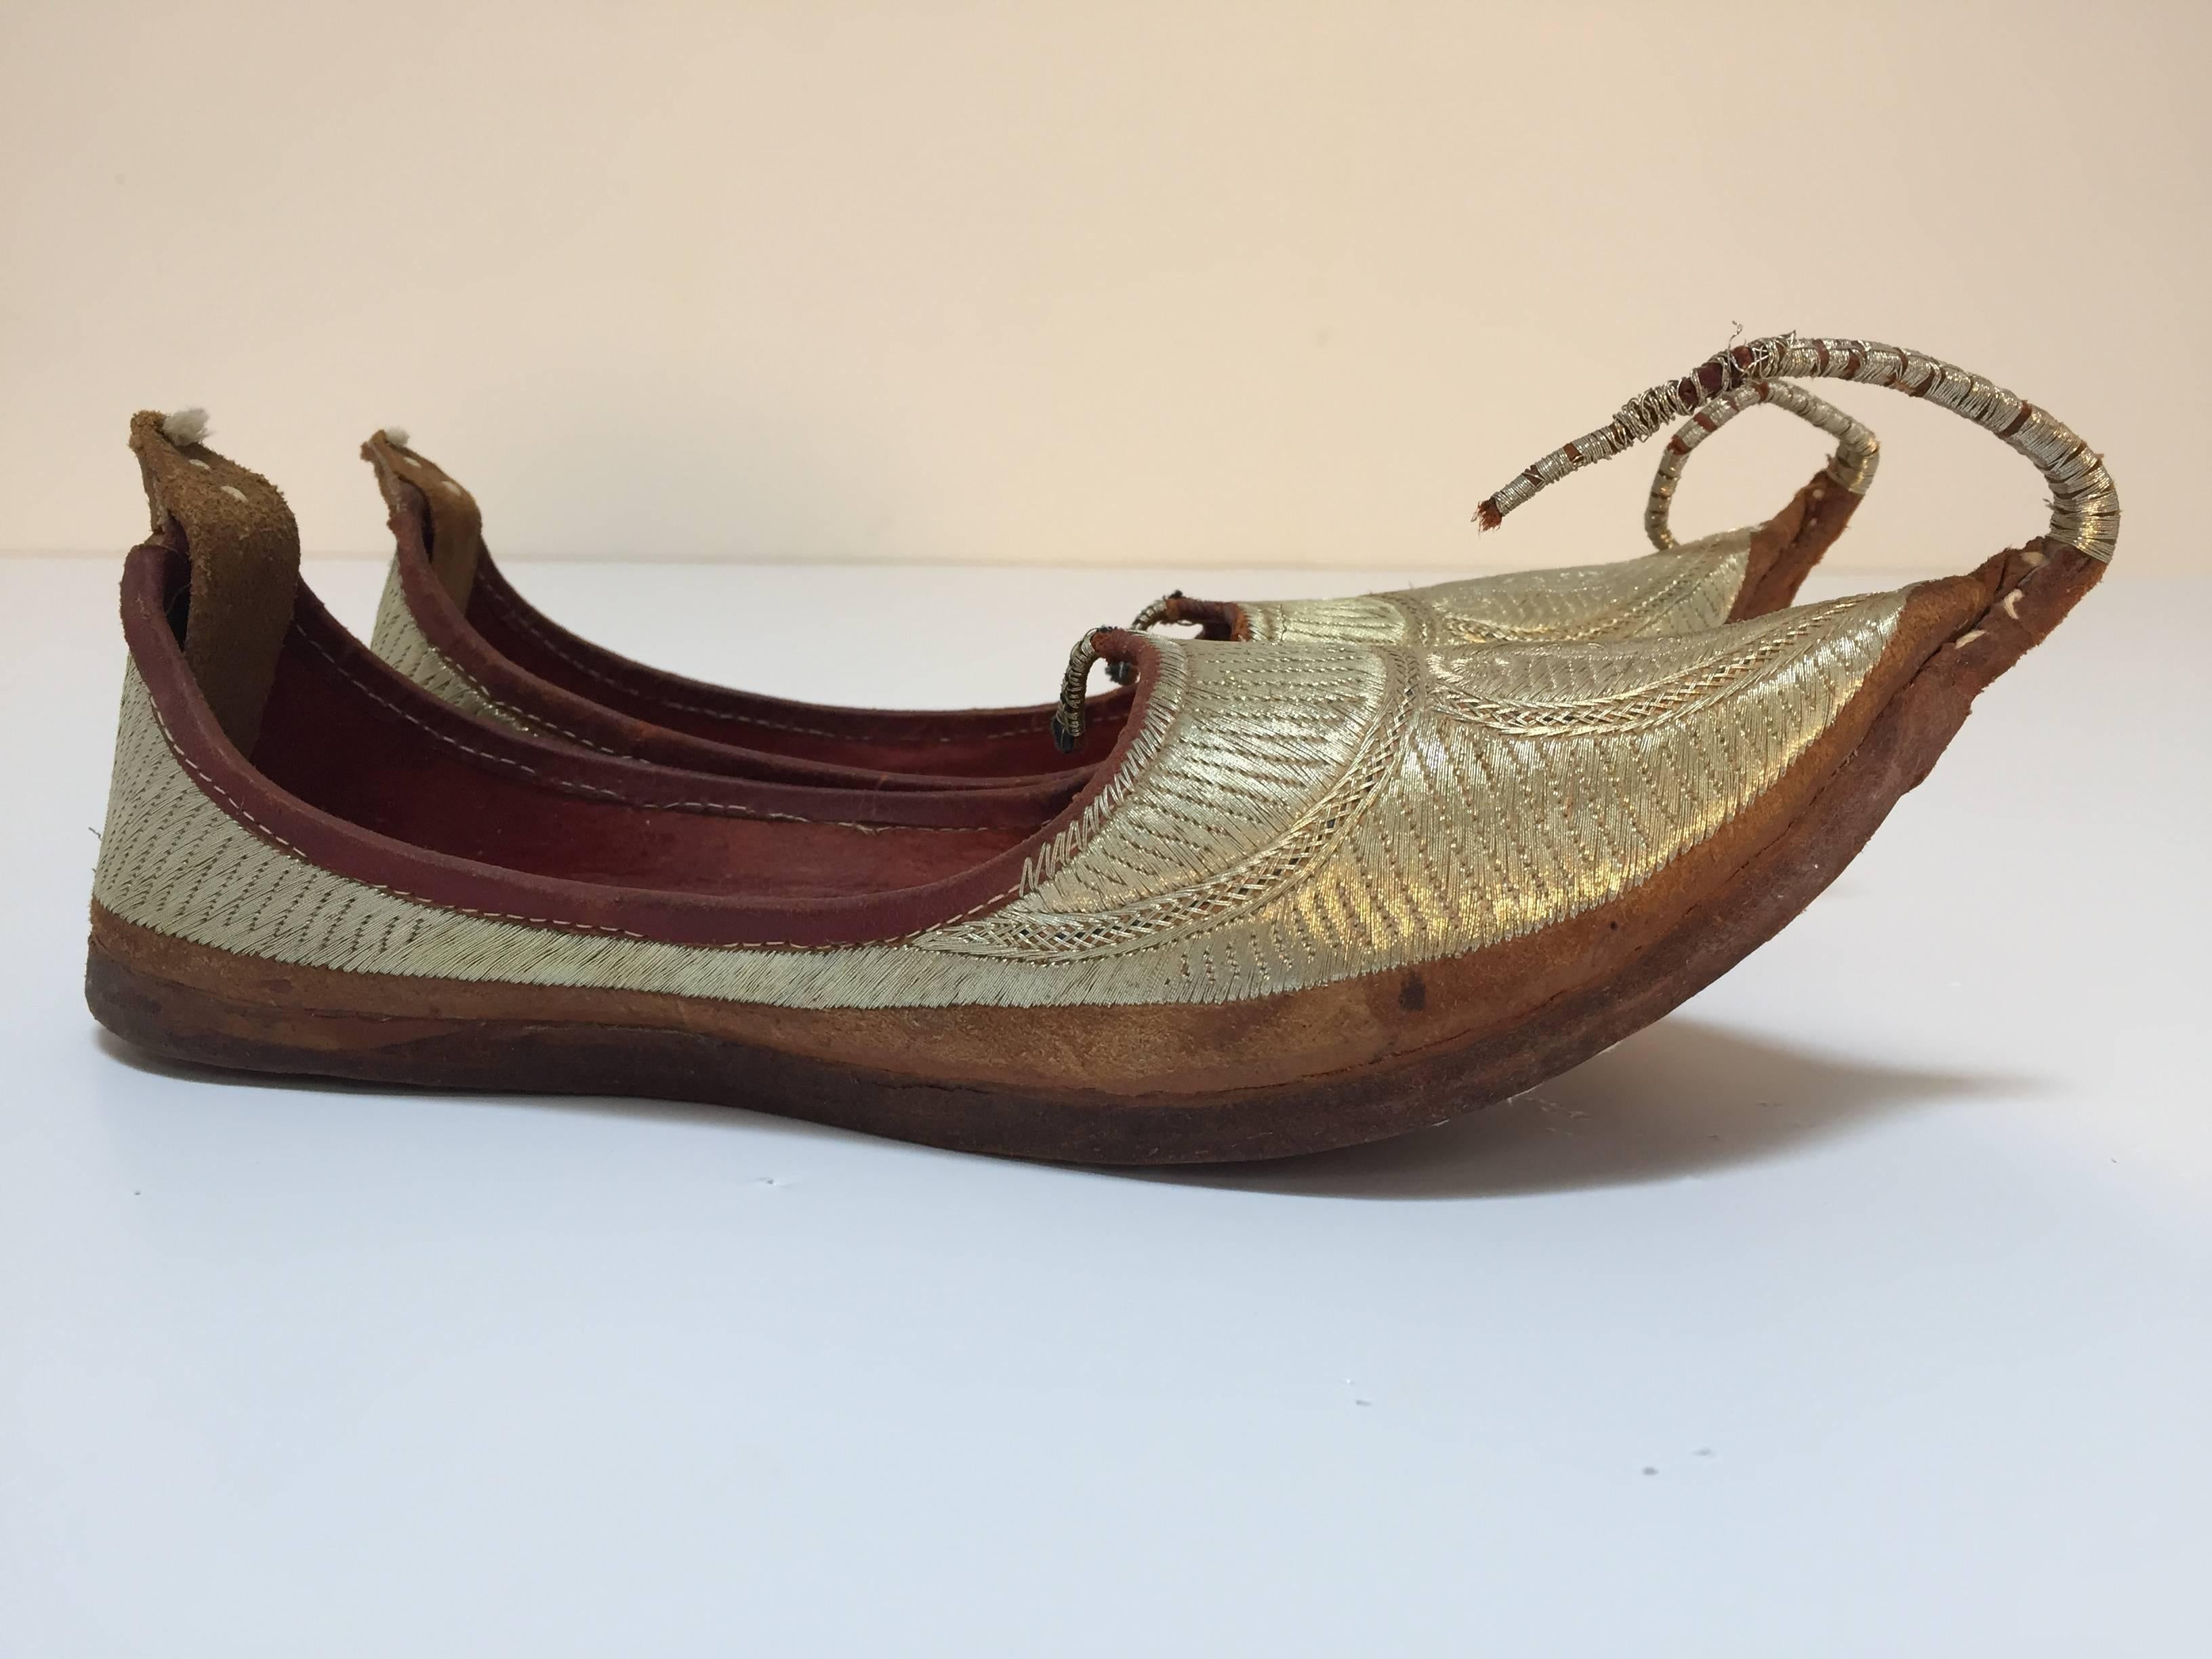 Moorish Arabian Mughal Leather Shoes with Gold Embroidered curled Toe  In Good Condition For Sale In North Hollywood, CA